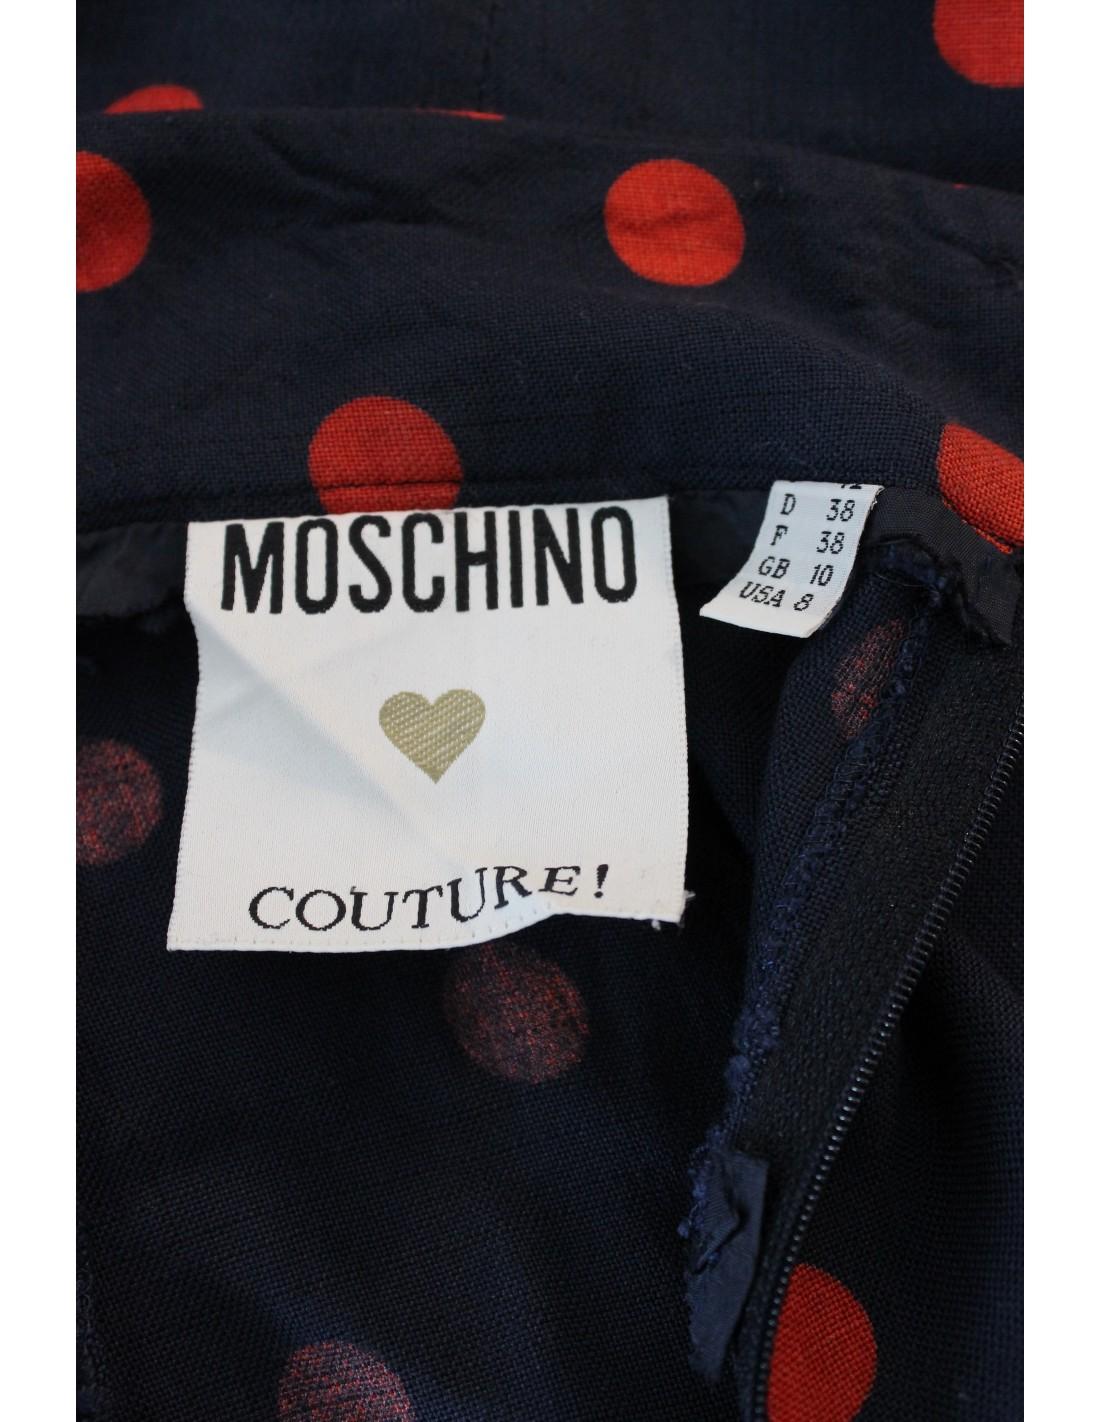 Moschino Blue Red Polka Dot Short Skirt In Excellent Condition In Brindisi, Bt